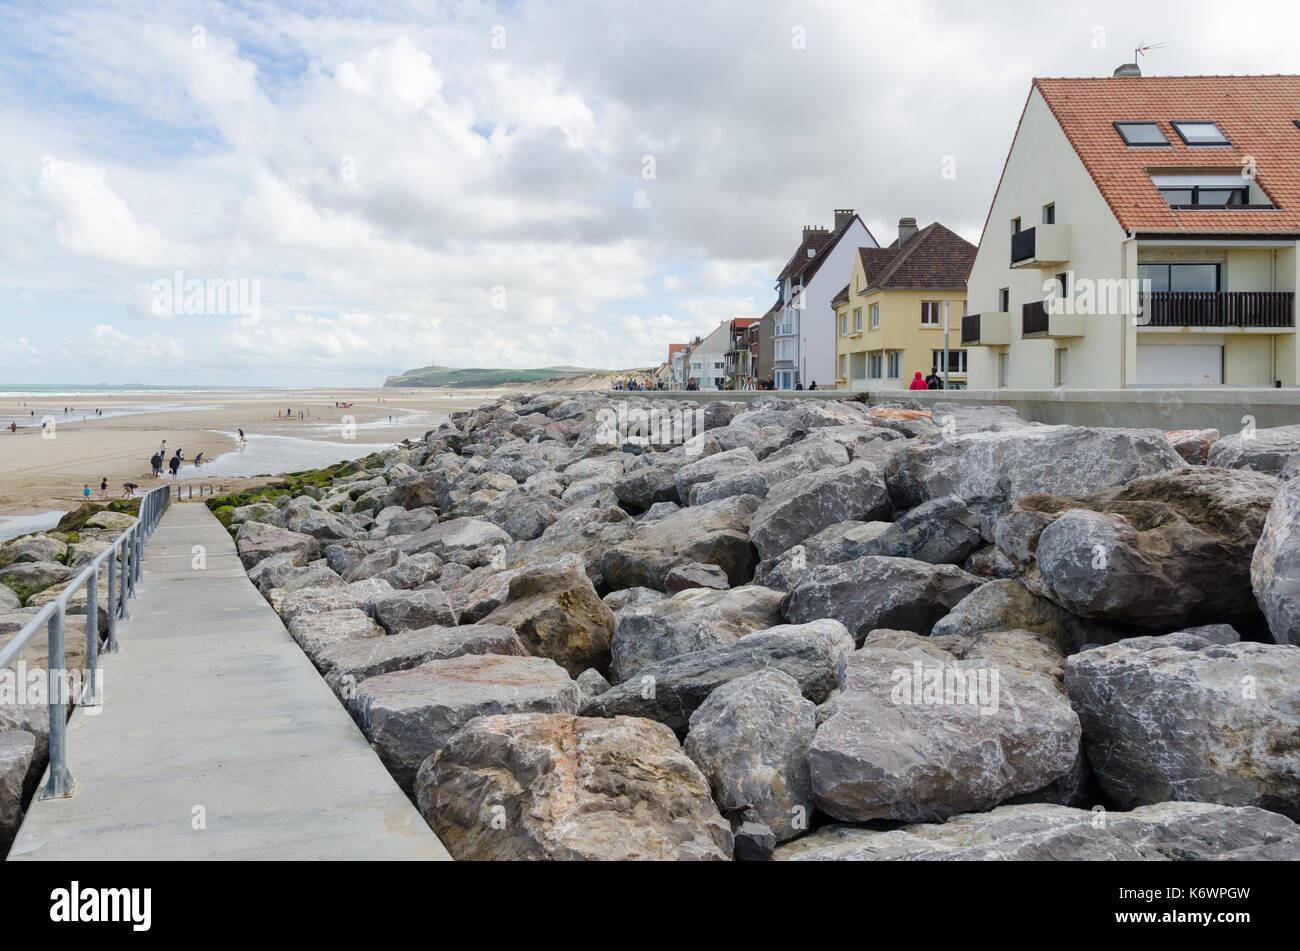 Sea defence wall at the pretty seaside town of Wissant in the Pas-de-Calais region of northern France Stock Photo